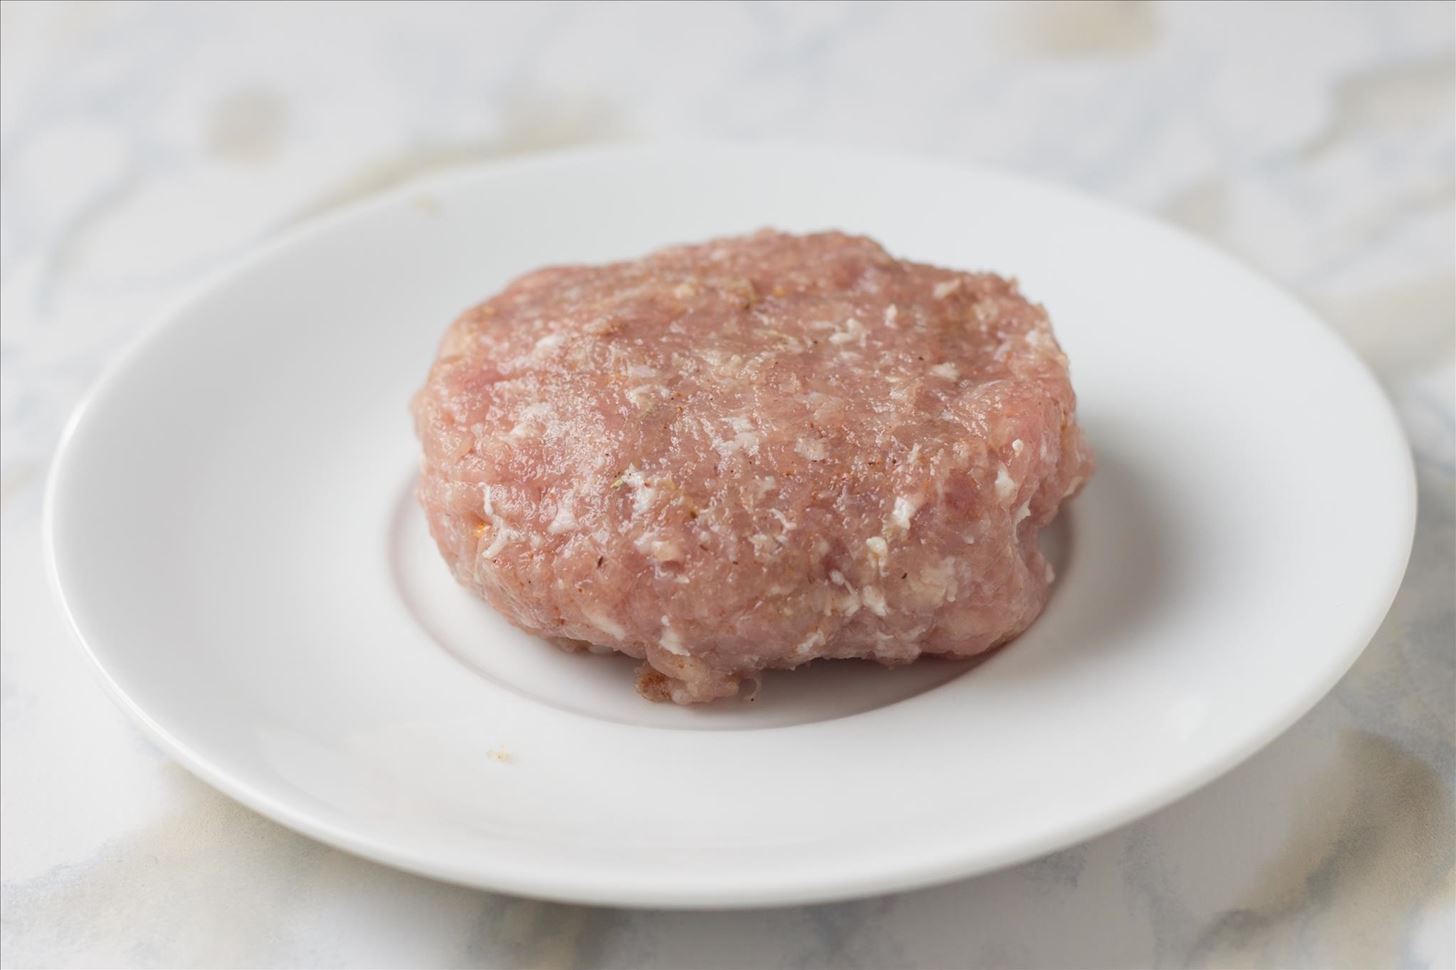 How to Make Delicious & Juicy Sausage at Home in Just 10 Minutes